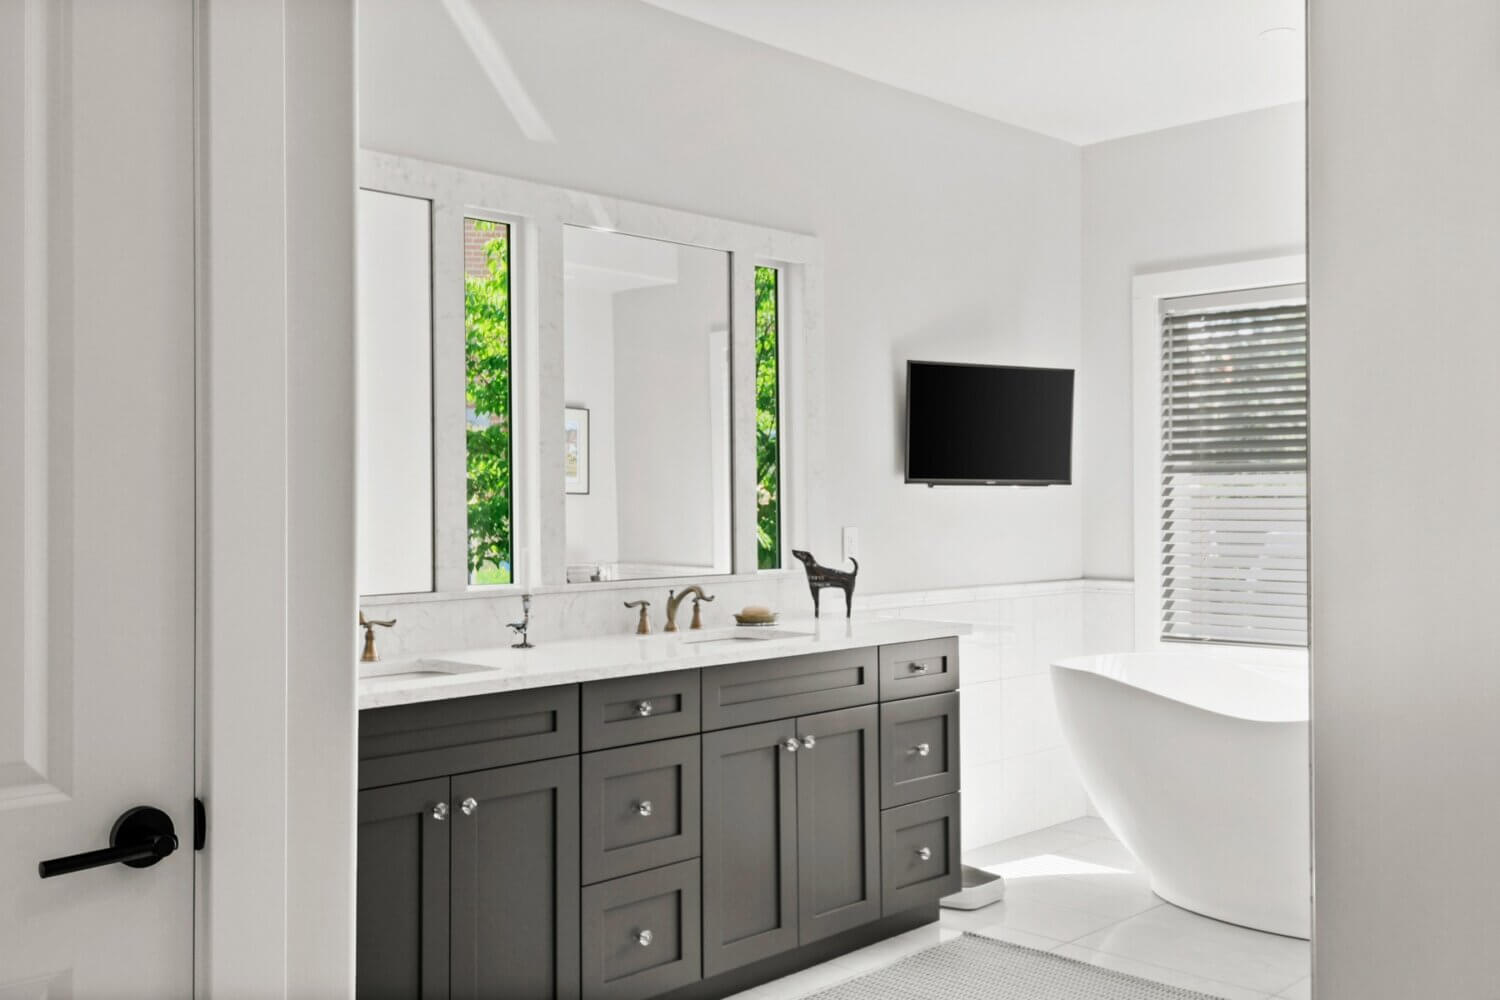 A bright white master bathroom design with a dark, charcoal graphite gray painted vanity with two sinks.